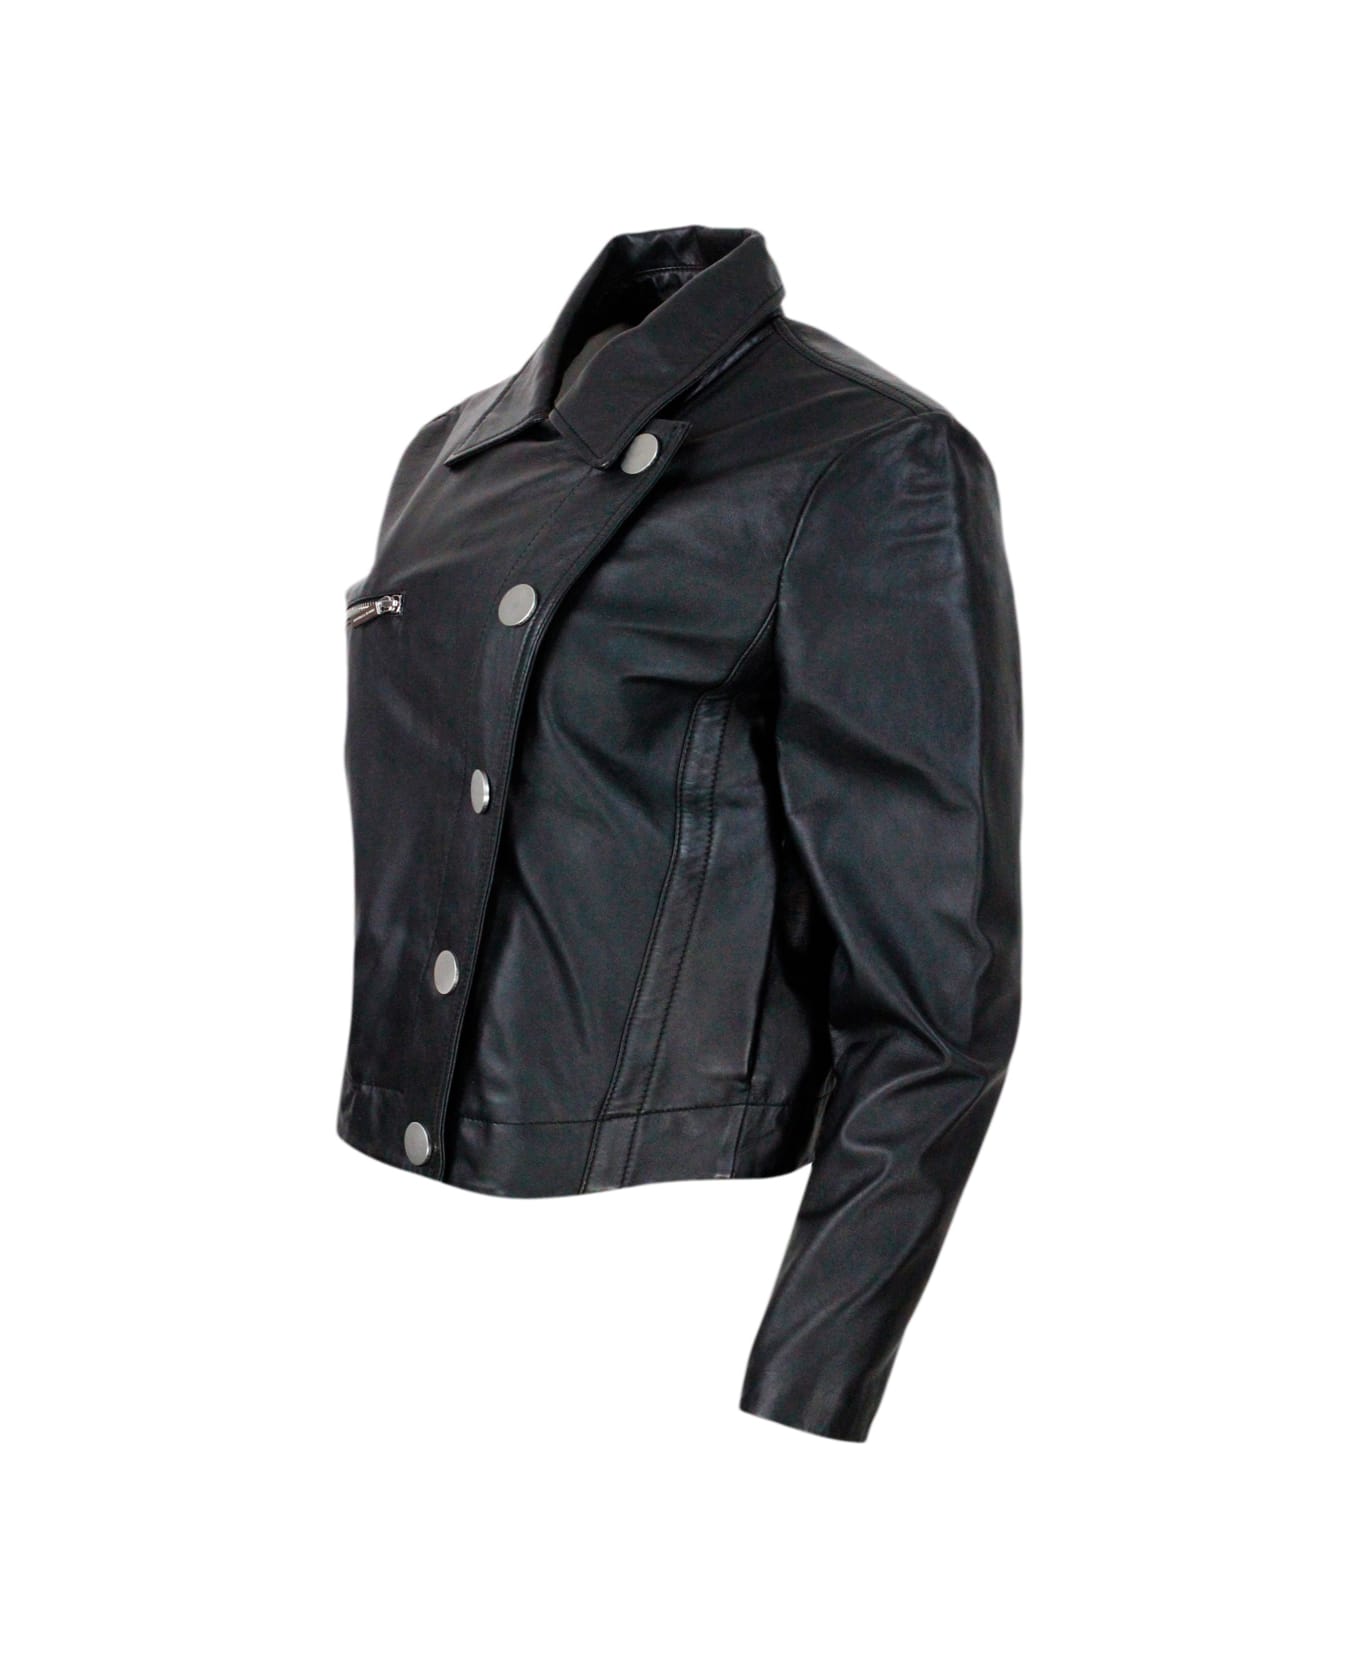 Armani Collezioni Studded Jacket With Button And Zip Closure Made Of Eco-leather With Zip On Pocket And Cuffs - Black